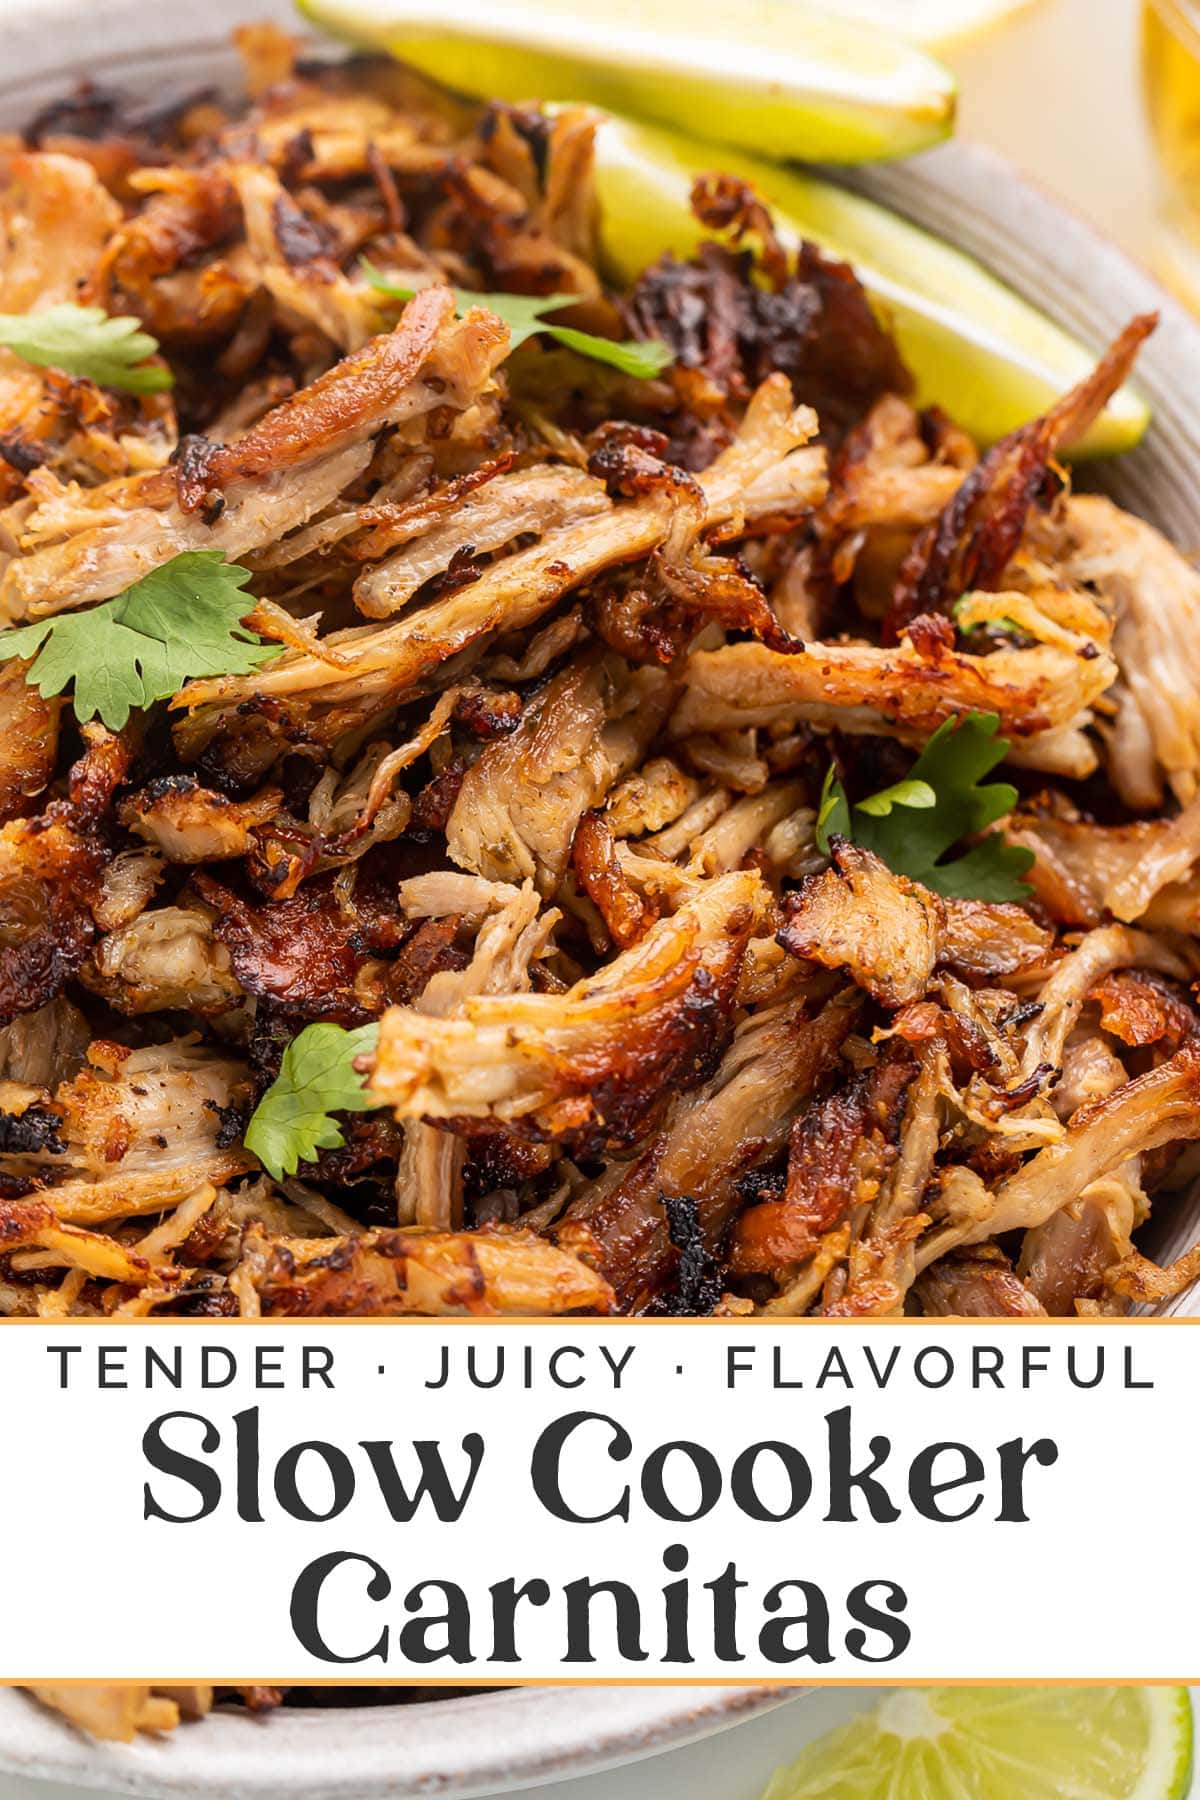 Pin graphic for slow cooker carnitas.